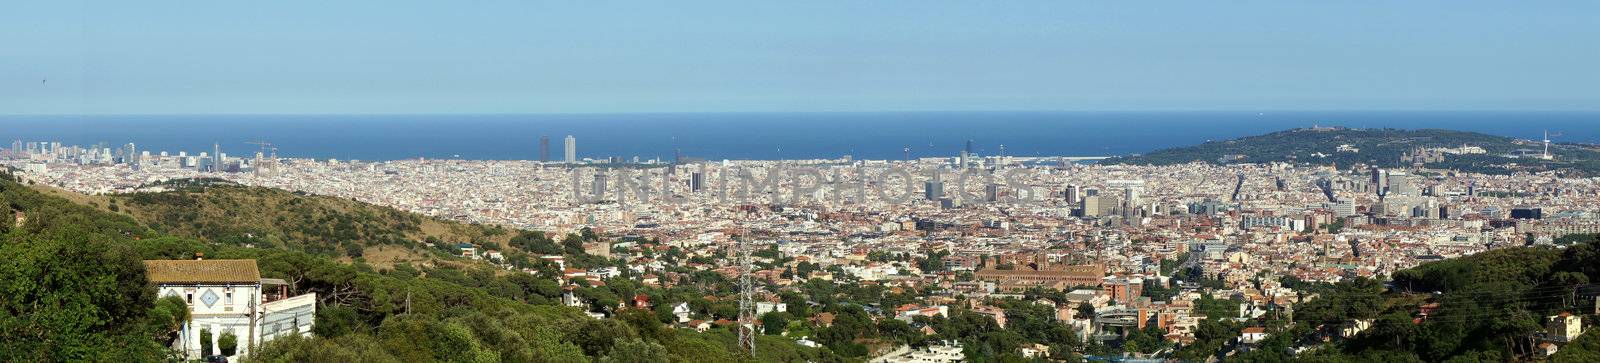 Wide panorama of Barcelona city at the Mediterranean Sea.               